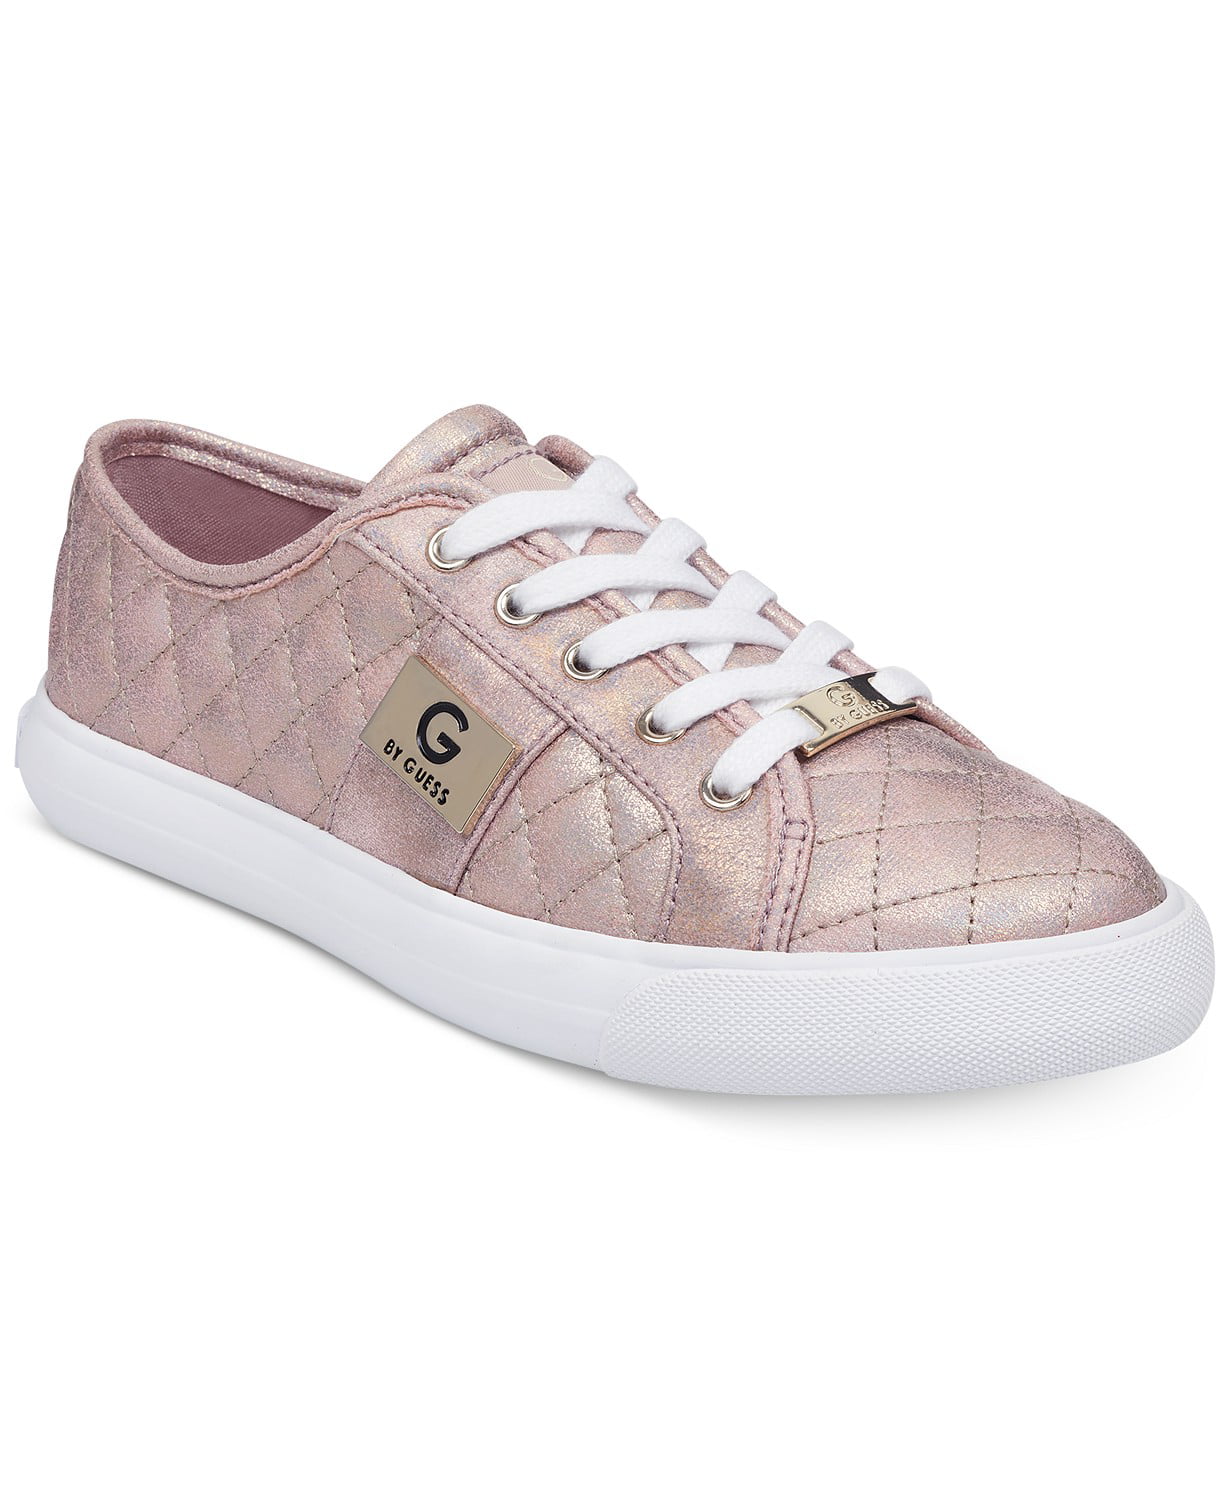 g shoes by guess